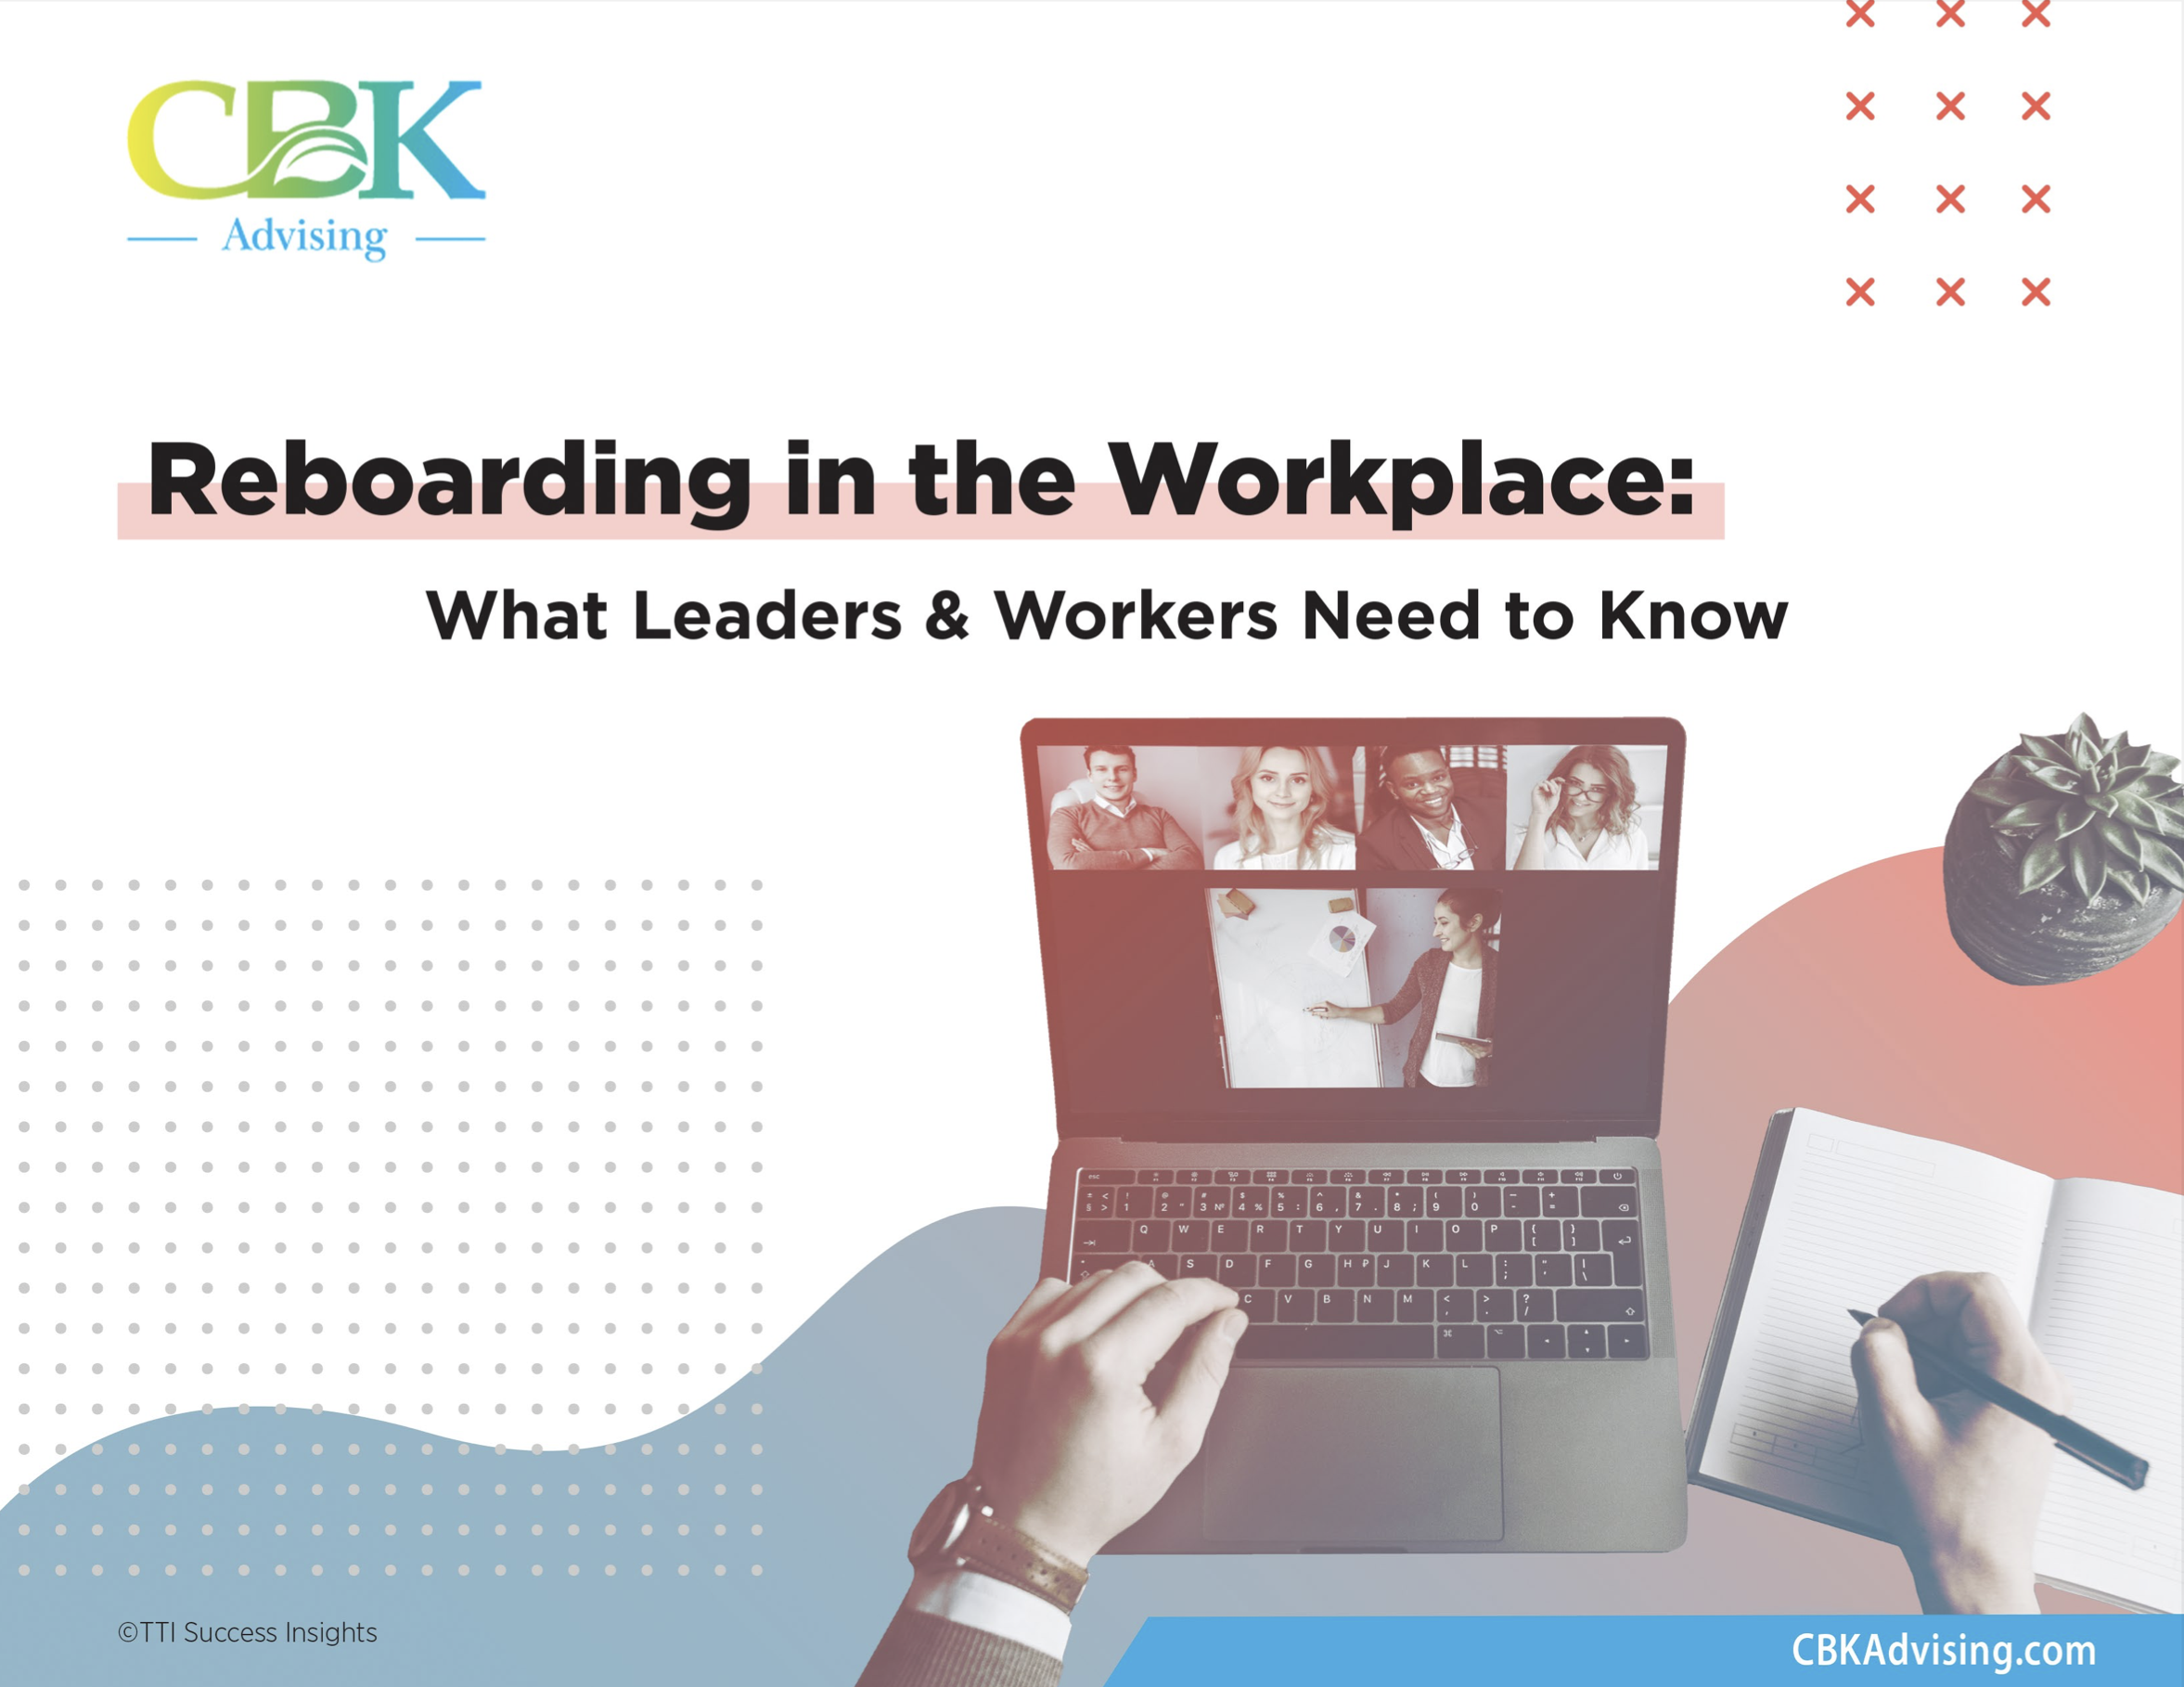 CBK Advising-Reboarding in the Workplace